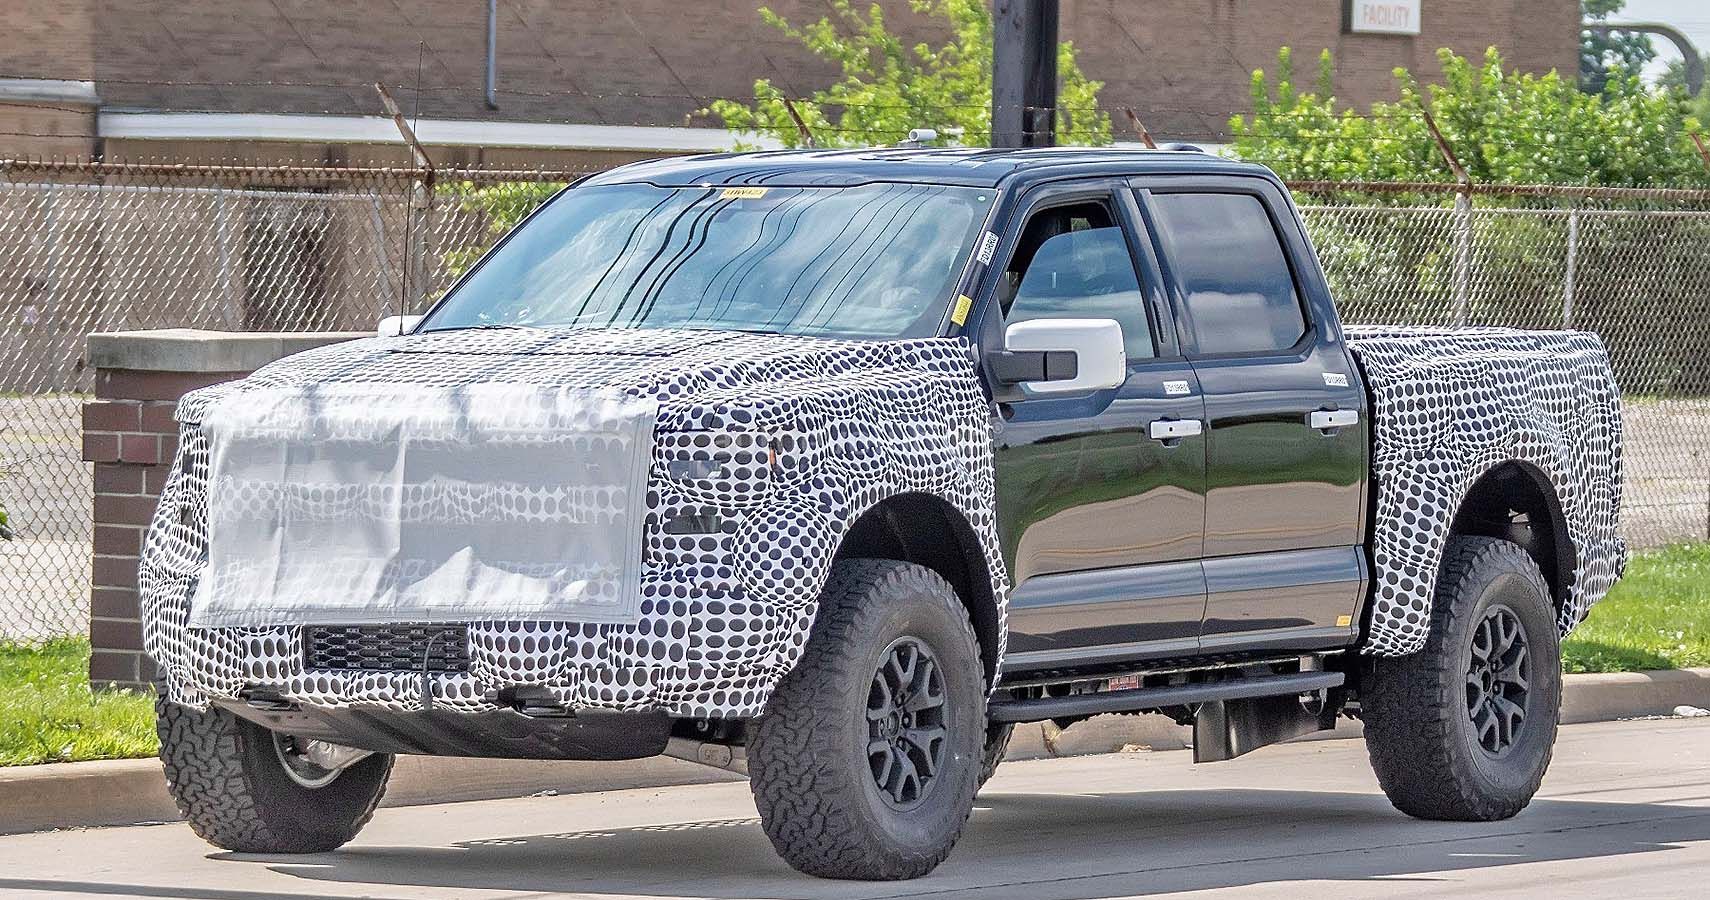 Here's What We Expect From The 2021 Ford Raptor